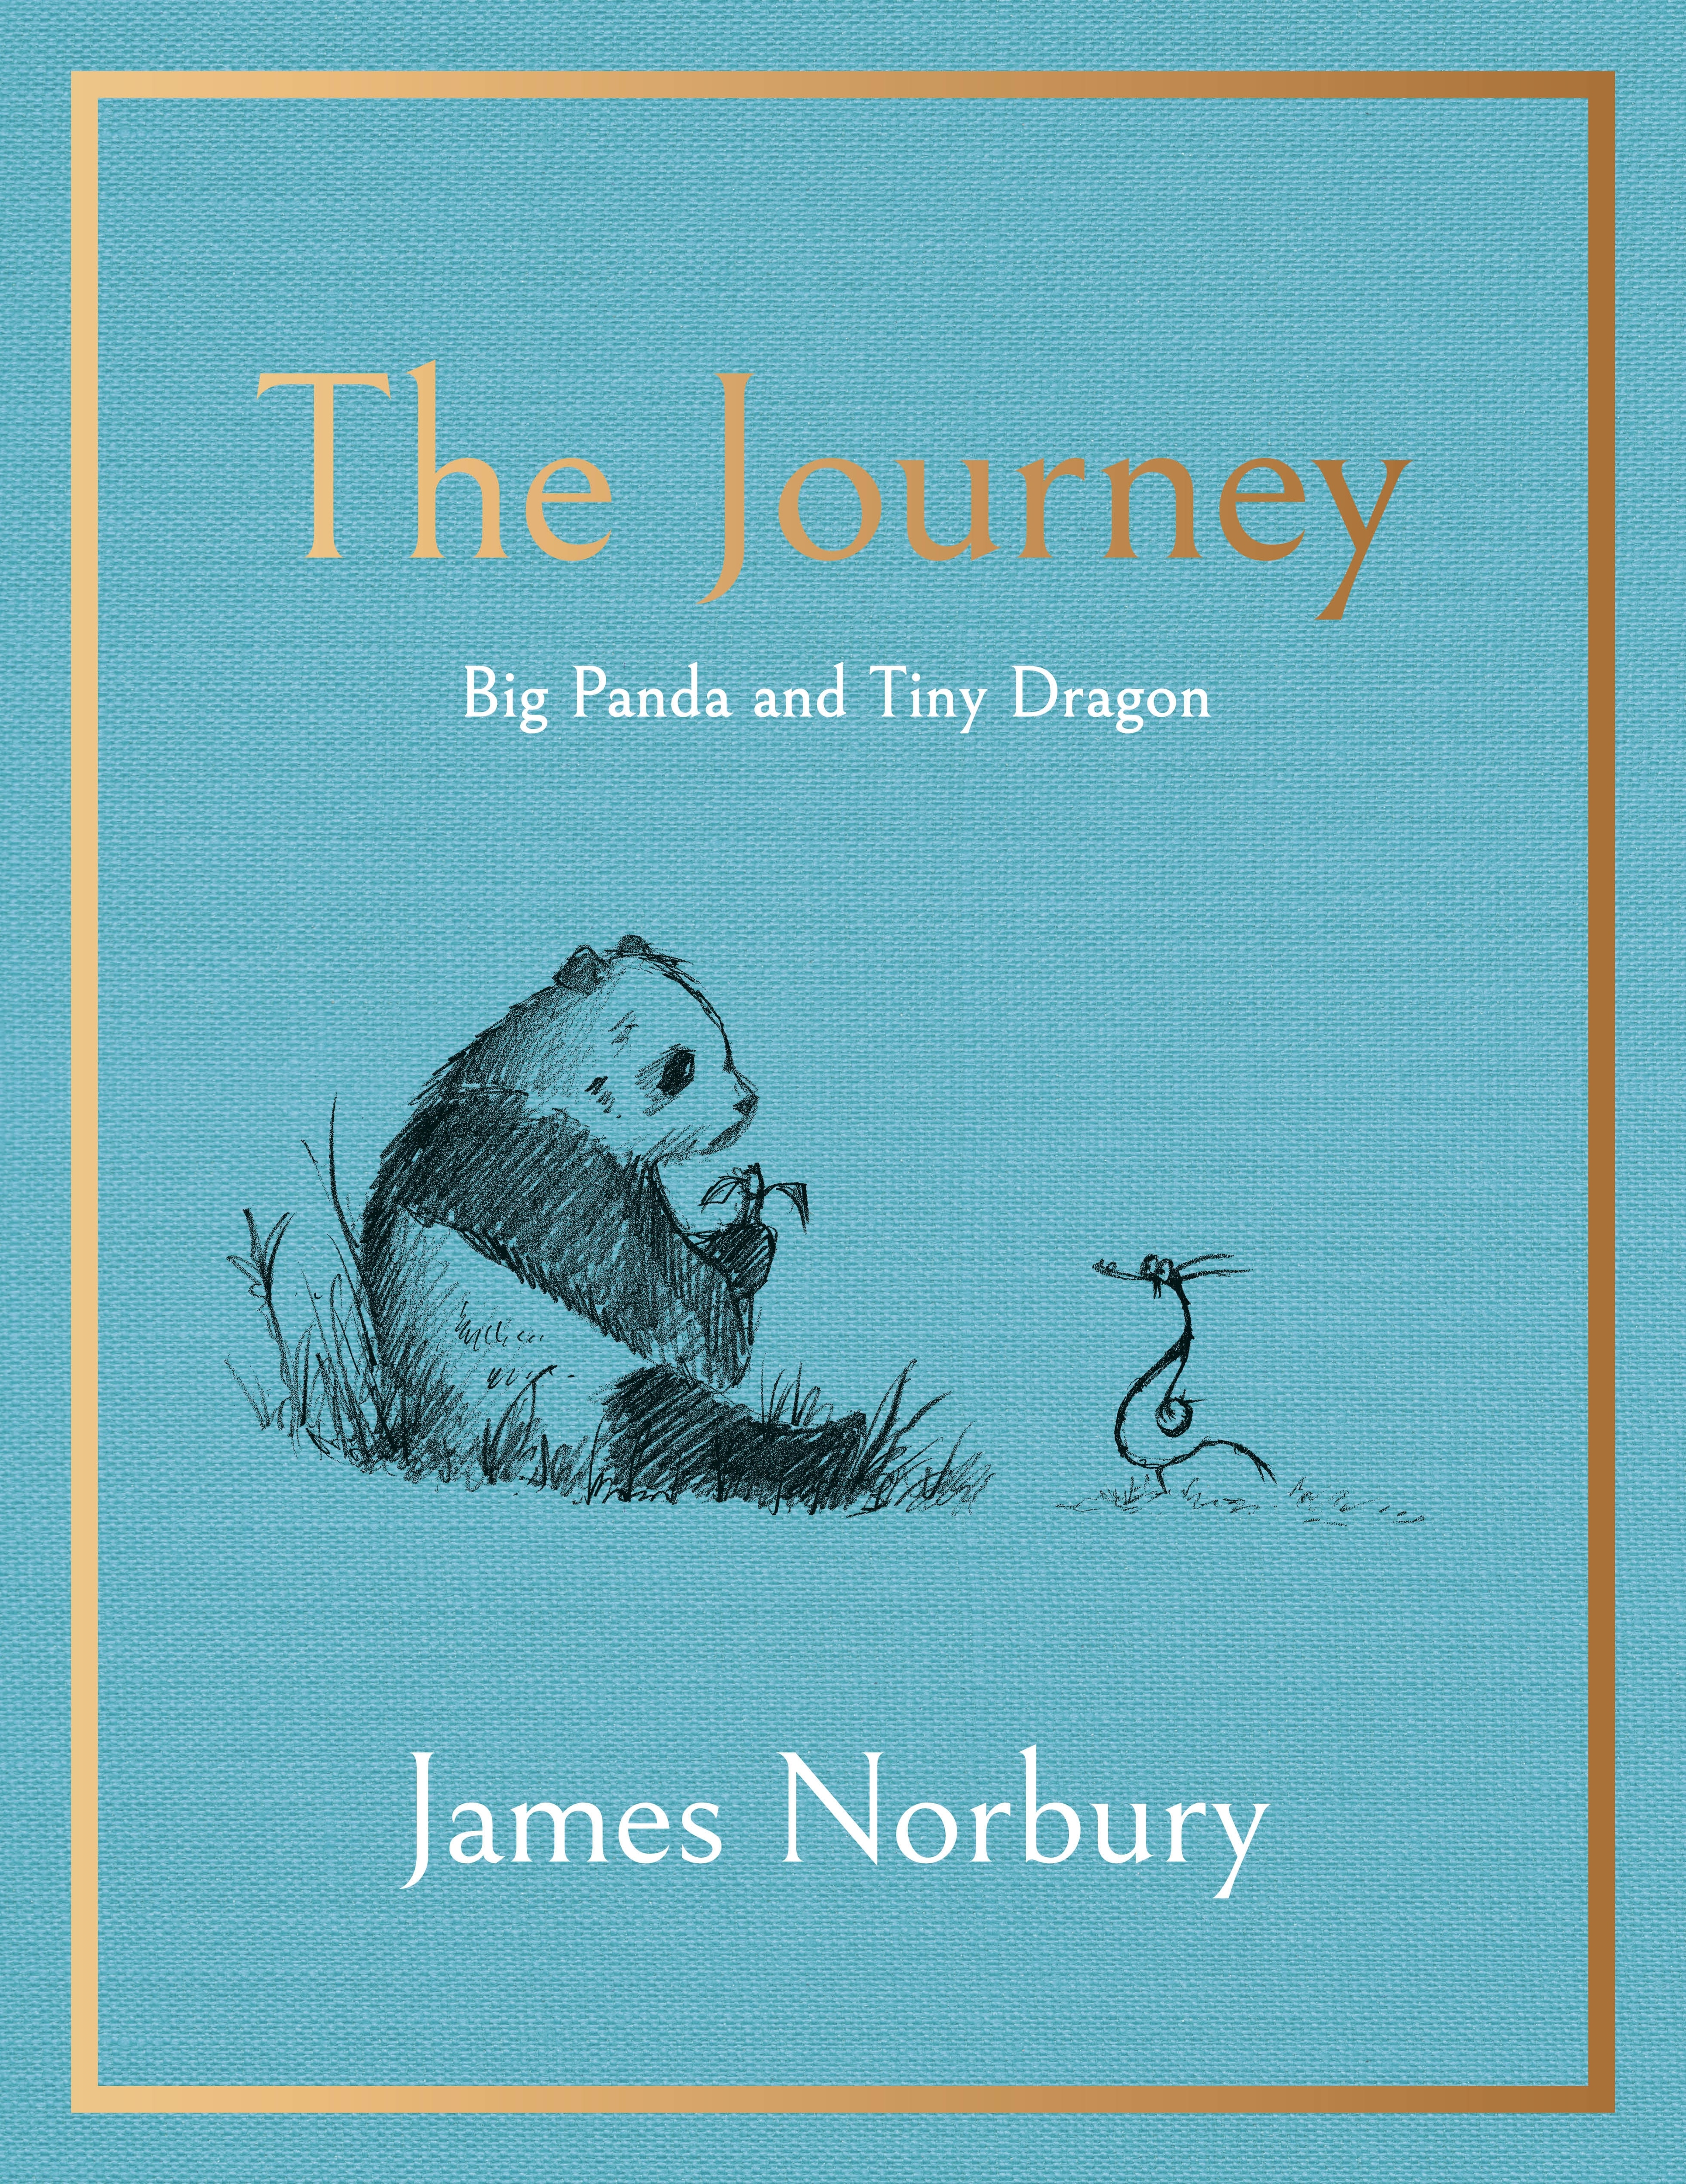 Book “The Journey” by James Norbury — September 29, 2022